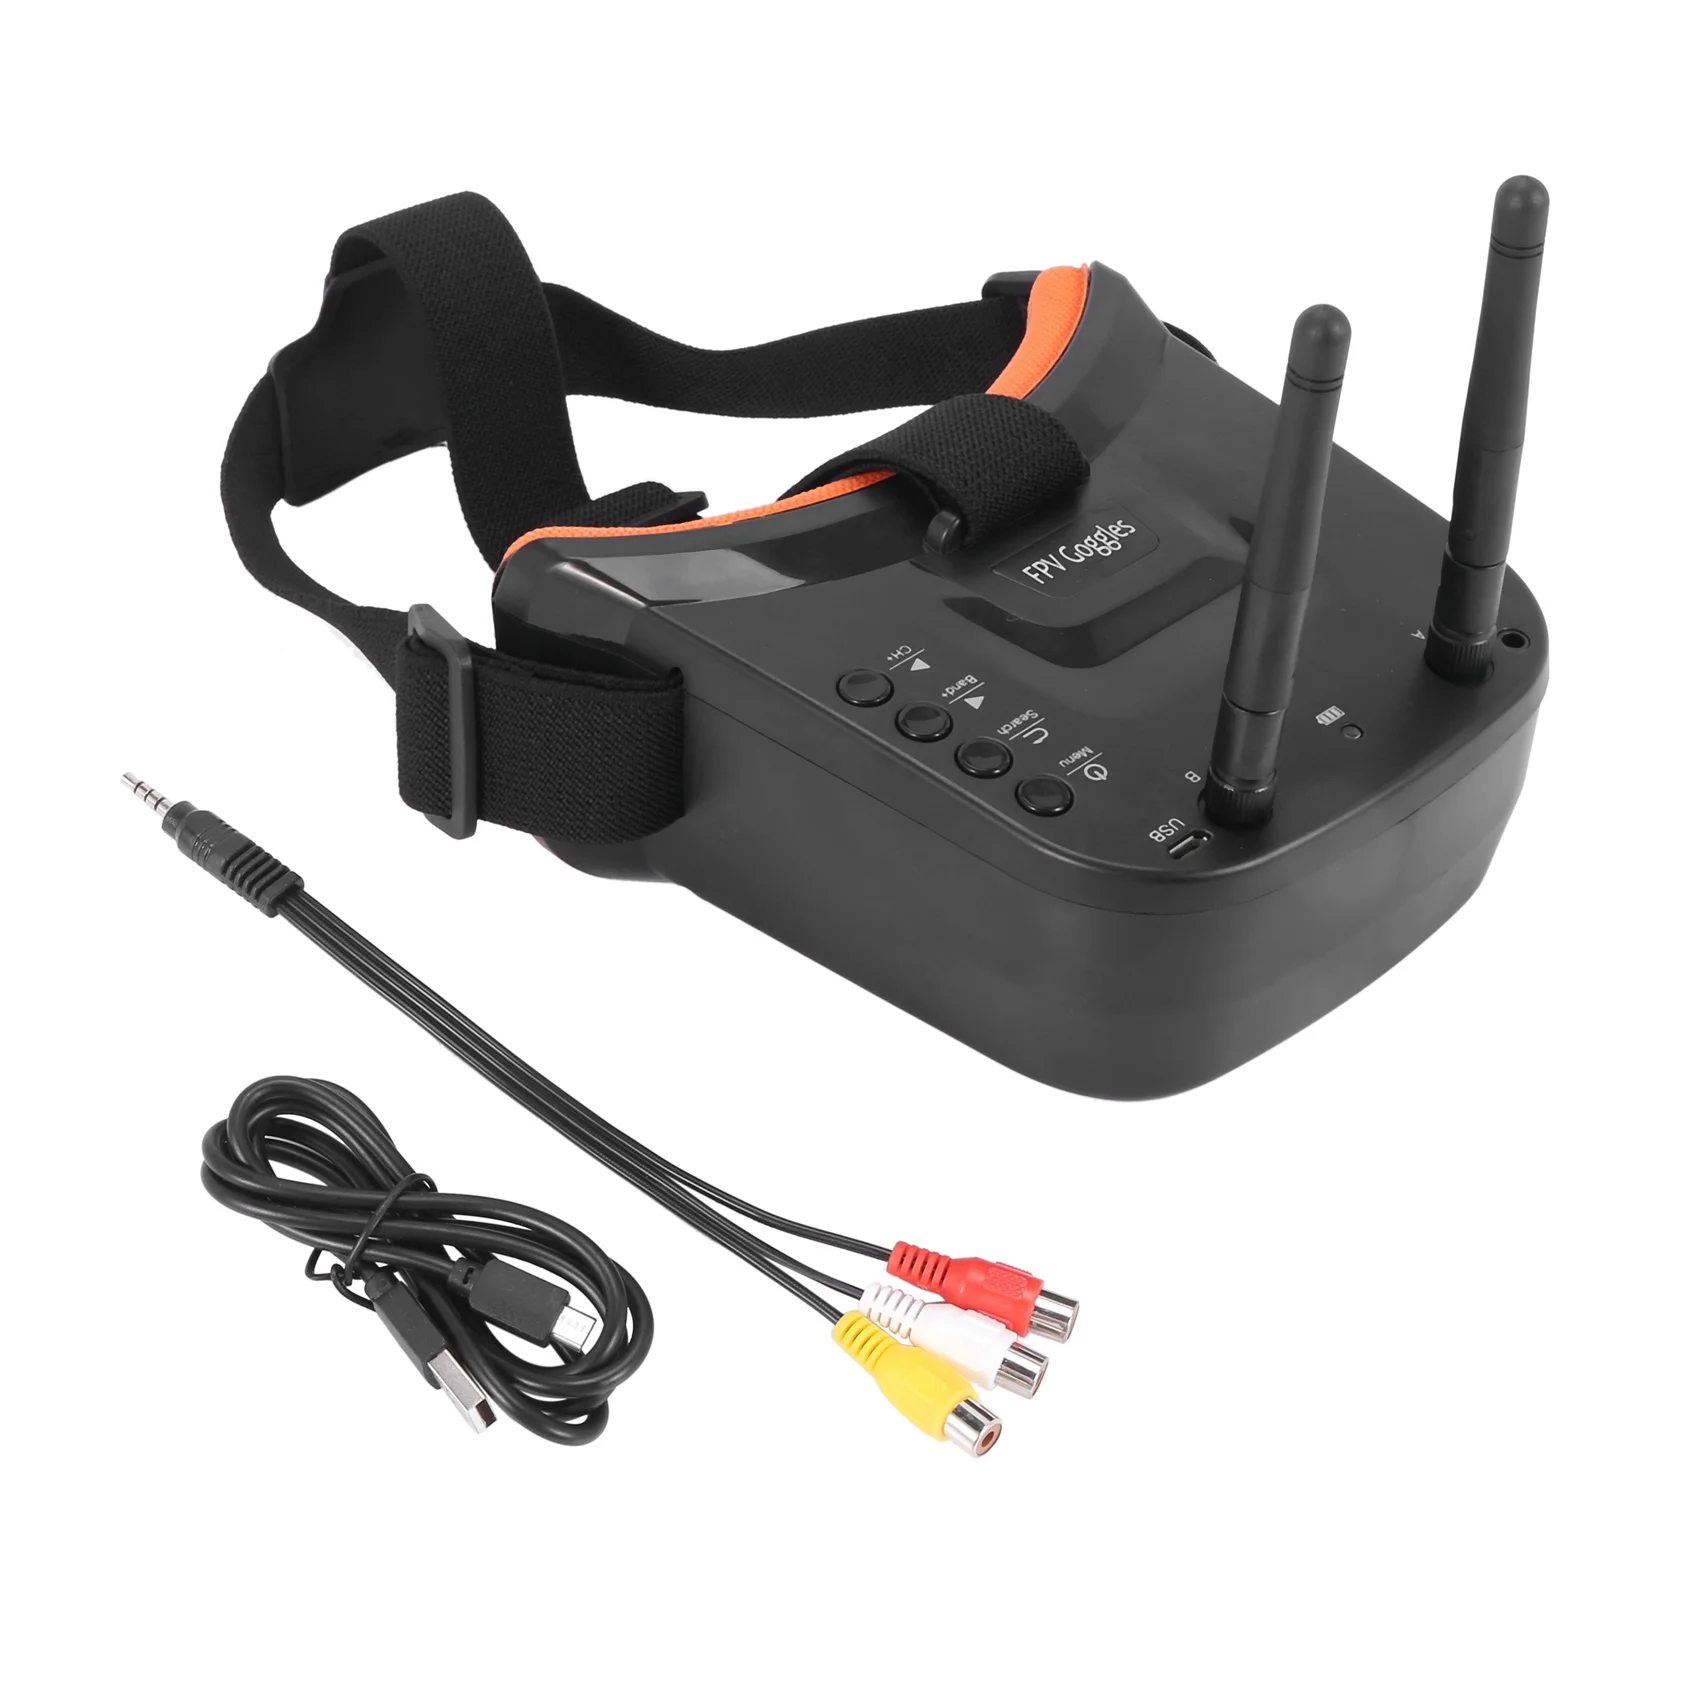 

Mini FPV Goggles 3 inch 480x320 Display Double Antenna Reception 5.8G 40CH with Battery for RC FPV Racing Drone Quadcopter